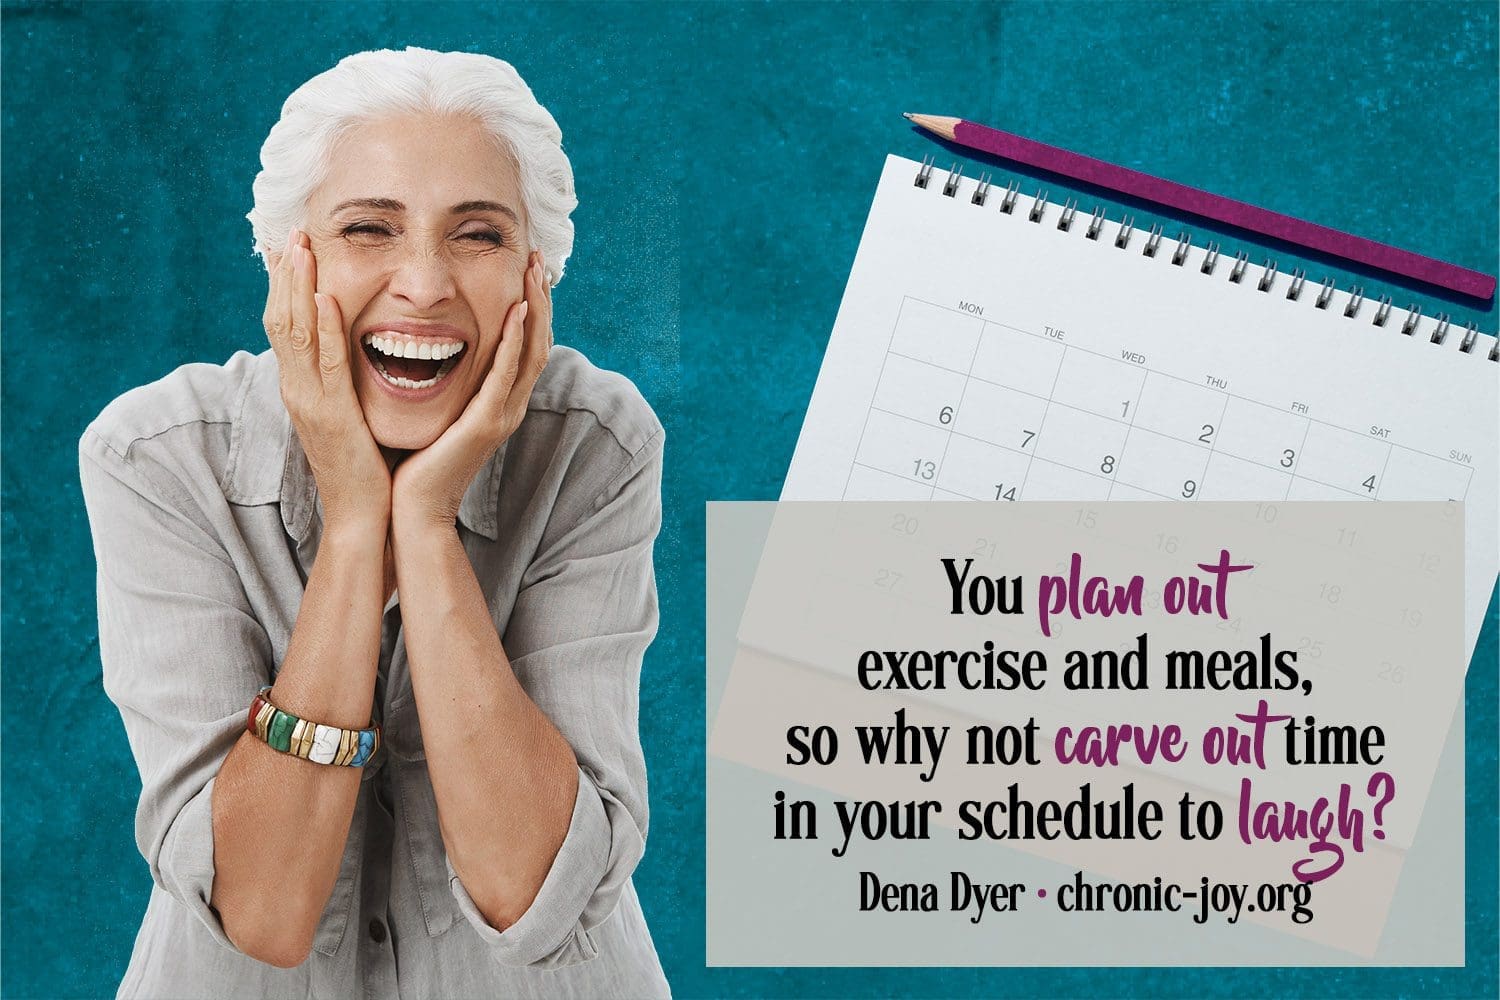 "You plan out exercise and meals, so why not carve out time in your schedule to laugh?" Dena Dyer